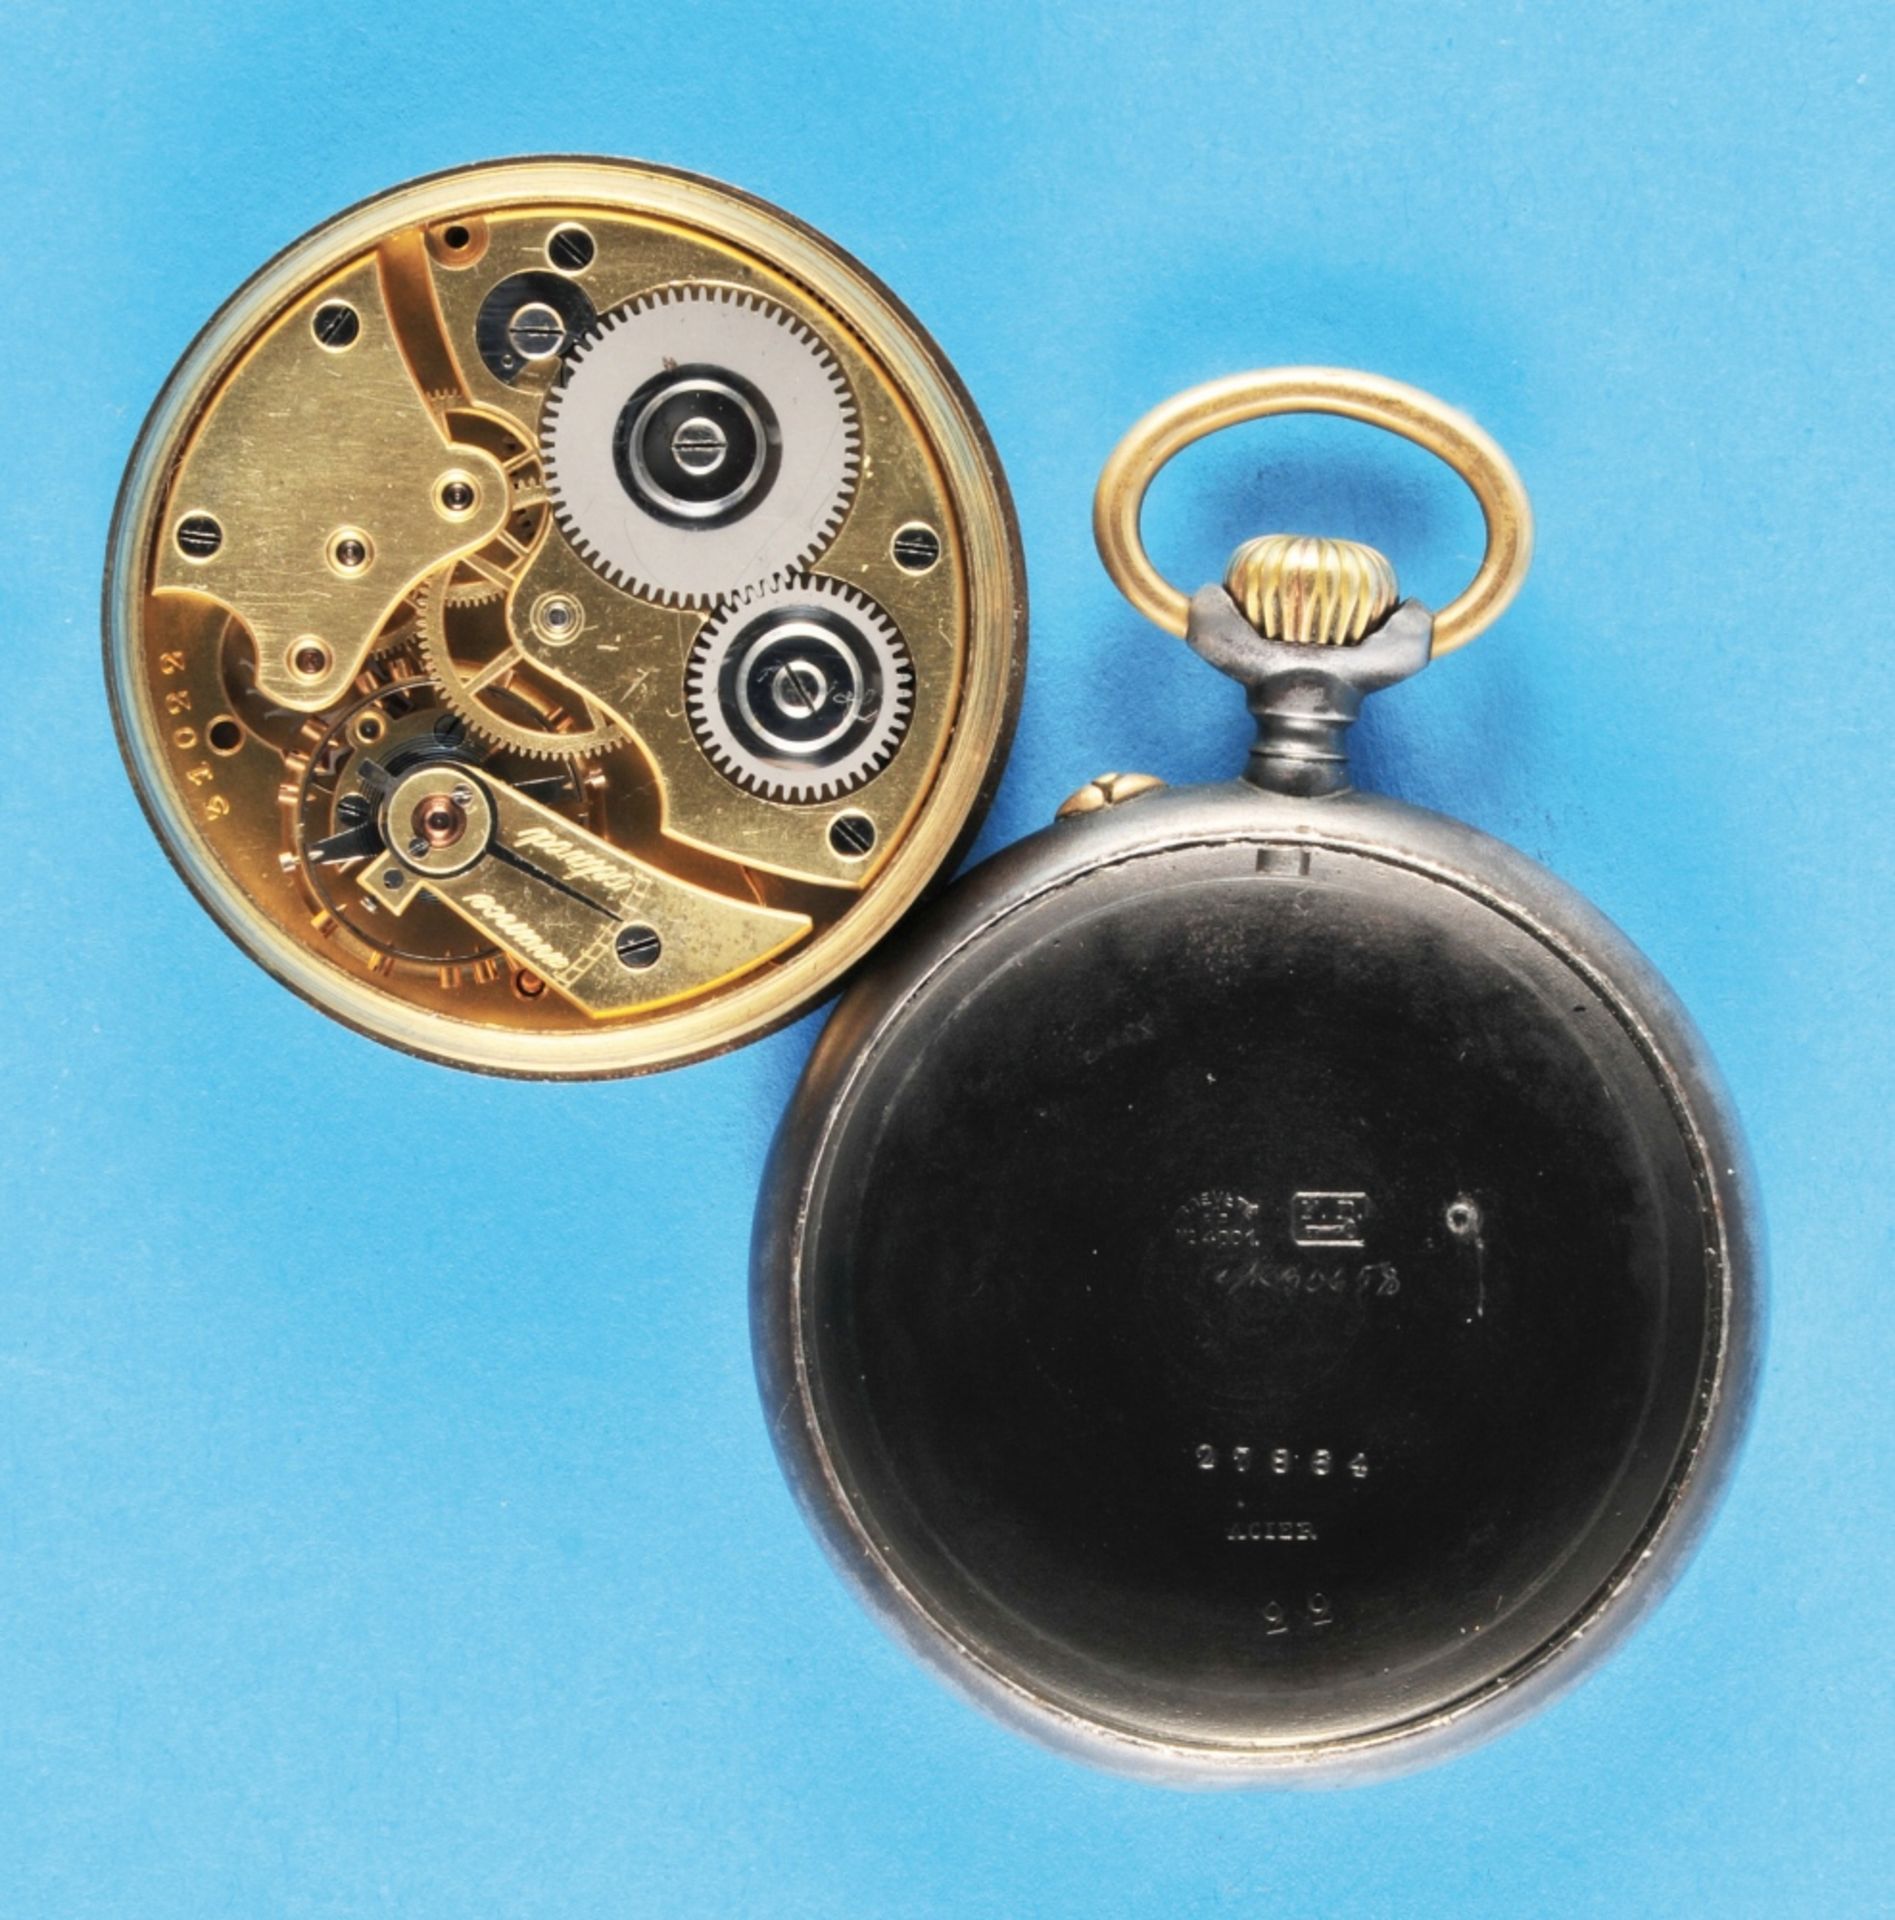 Burnished metal pocket watch with case patent, patent no. 4001, with patent specification in copy,